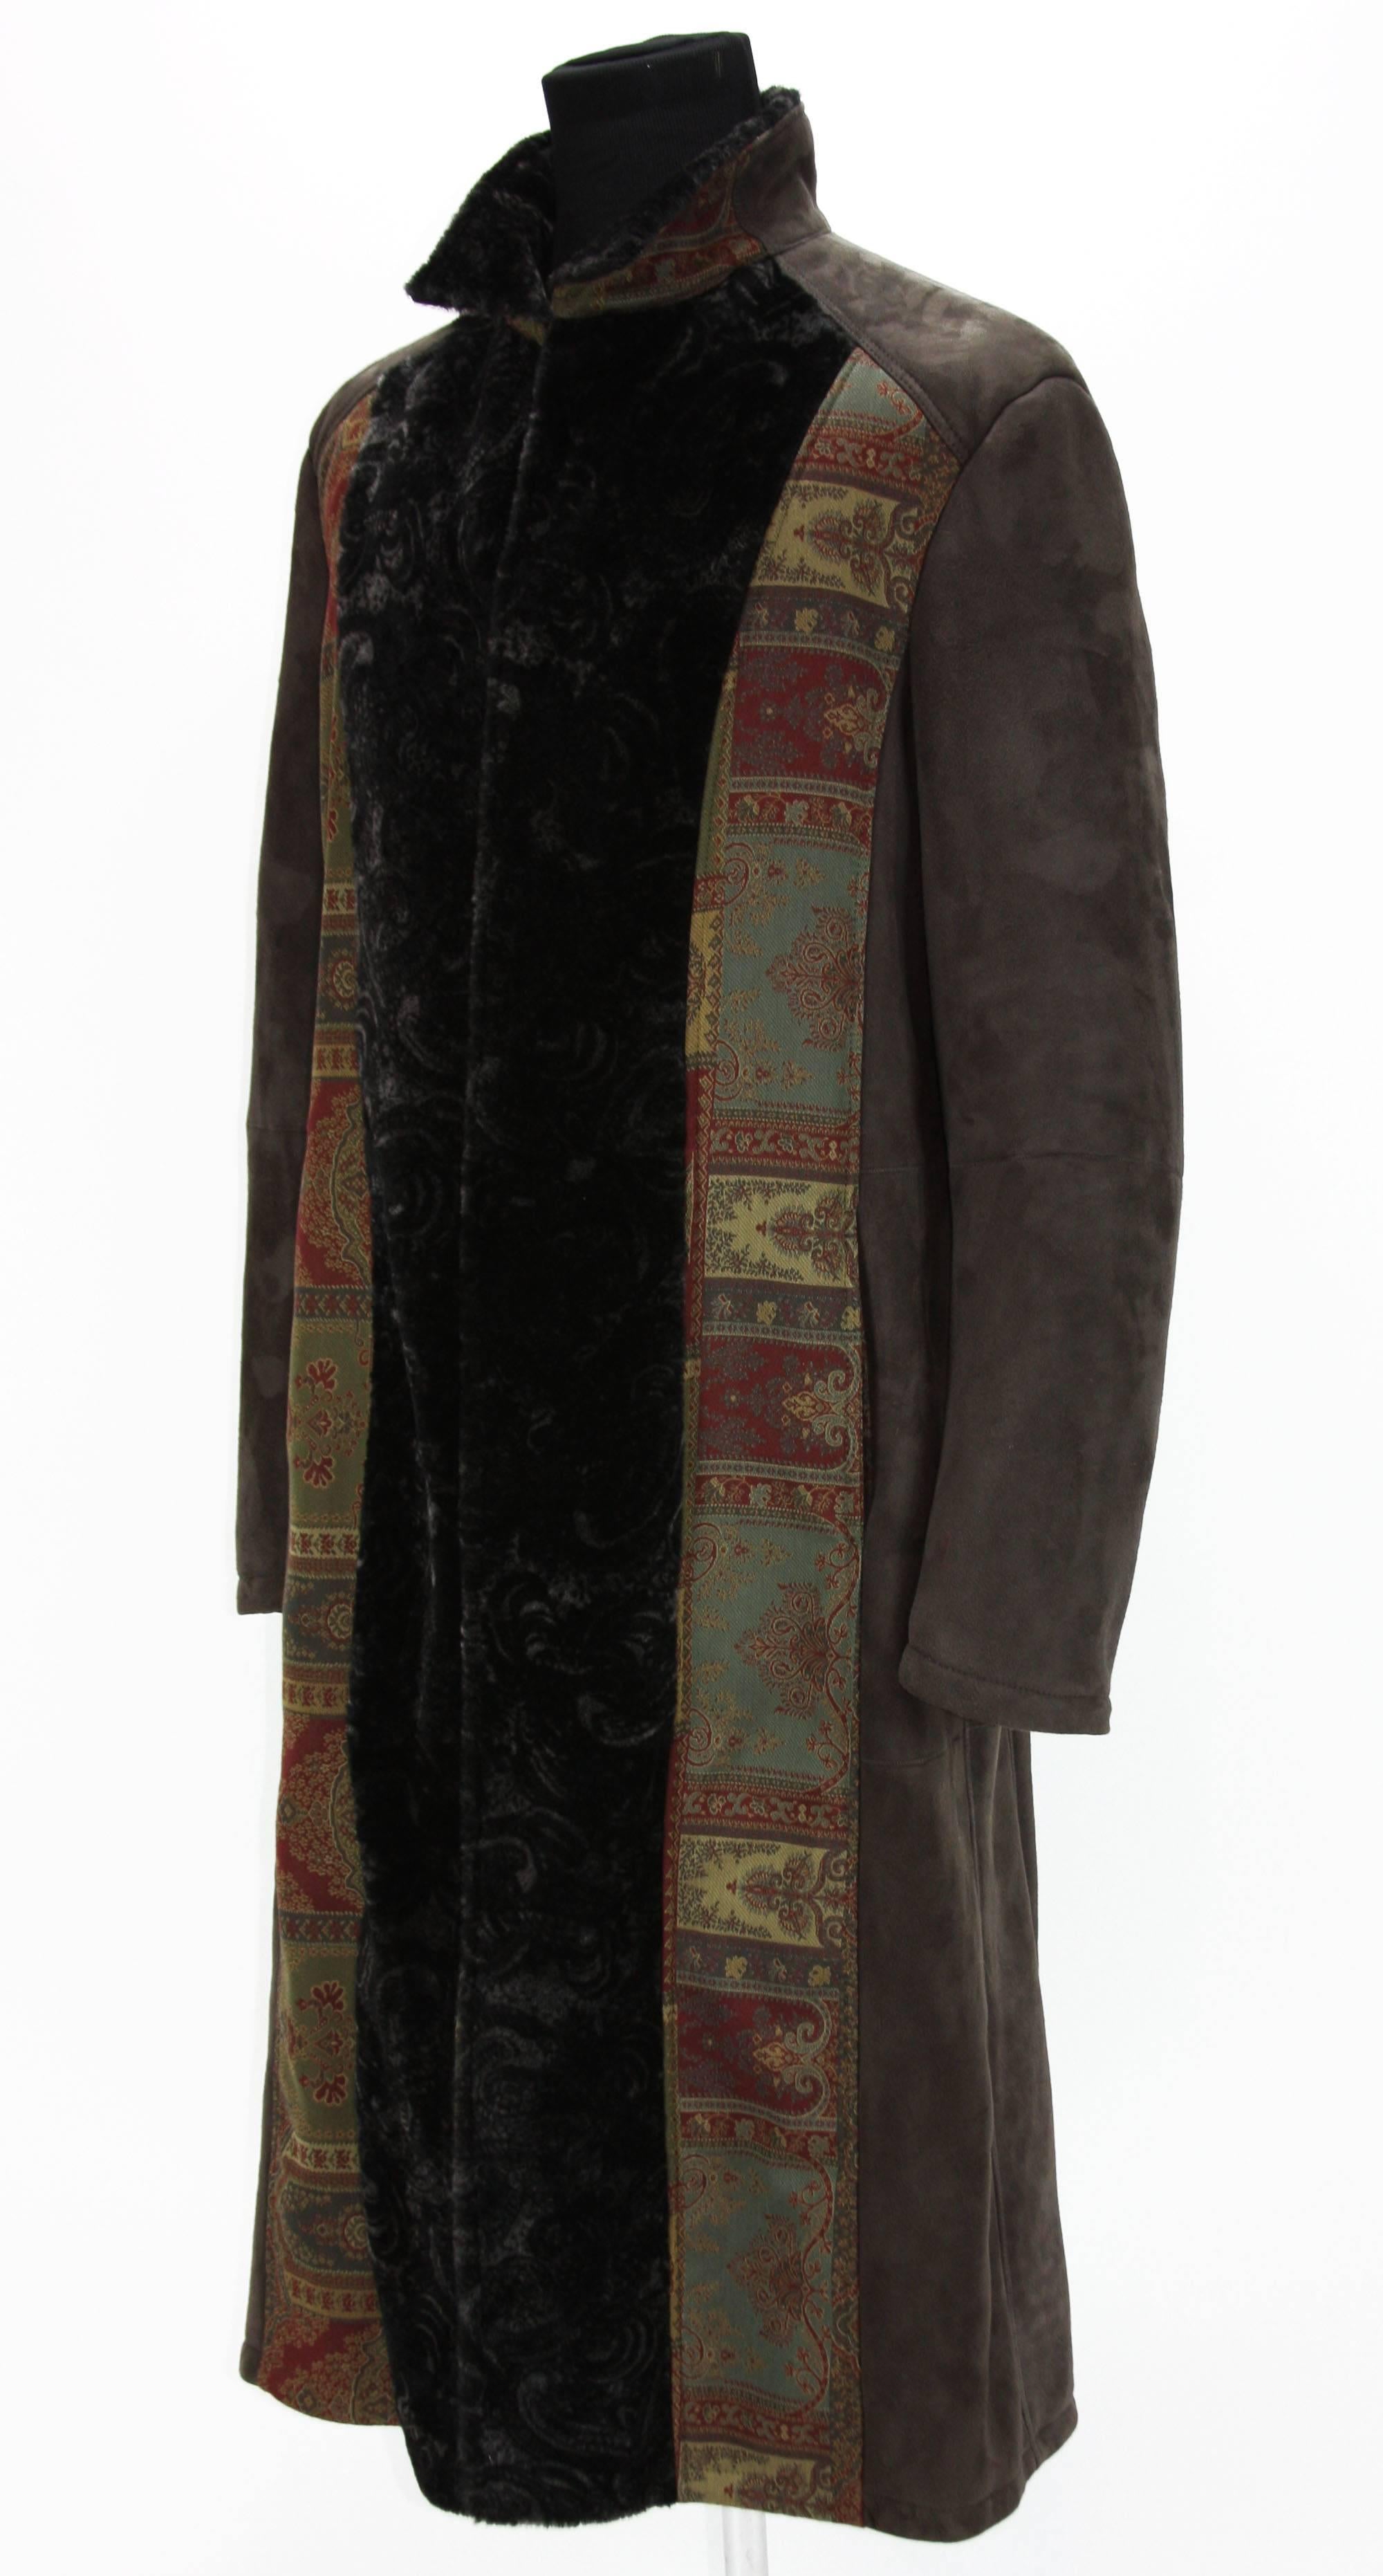 New ETRO Very UNIQUE Shearling MEN'S Coat
Italian Size 54 – US 44
Colors – CHARCOAL GRAY, BLACK
Tapestry – BRICK RED, GREEN, YELLOW
Black LAMB Inside & at Front has Special Cut Design
100% LAMB – ORIGIN SPAIN
Adorned with TAPESTRY – 75%